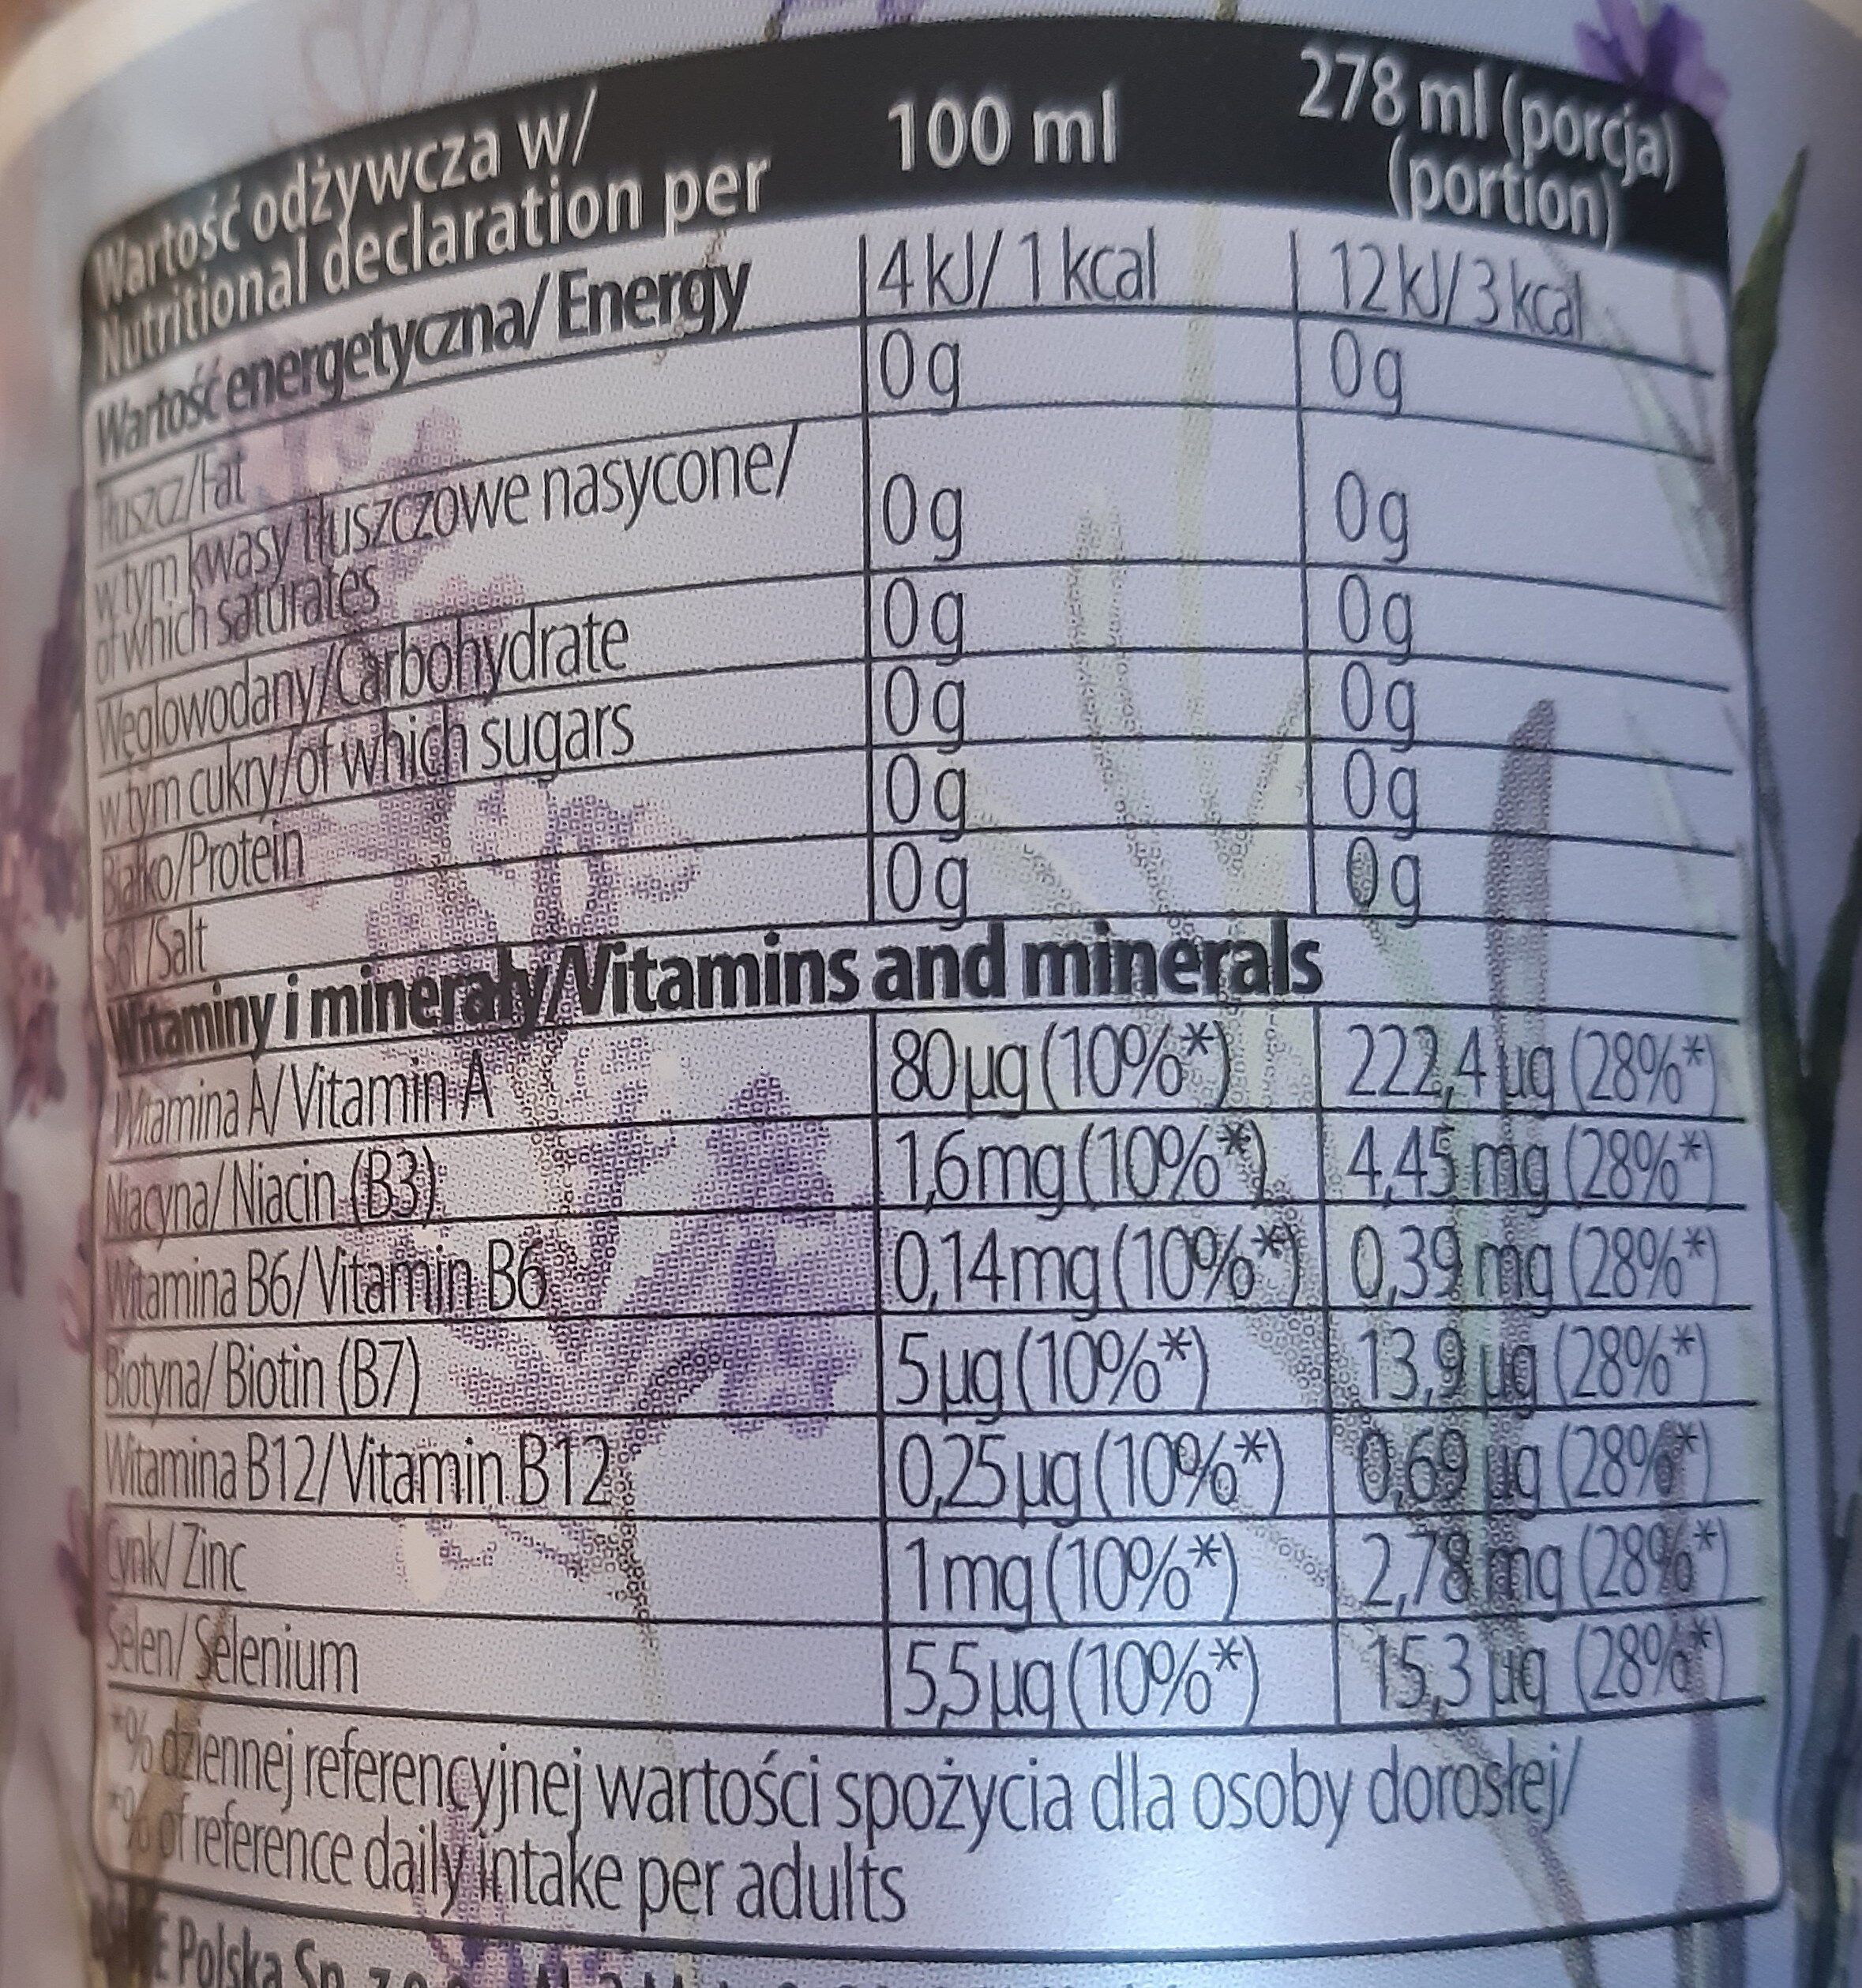 Oshee vitamin water beauty - Nutrition facts - pl